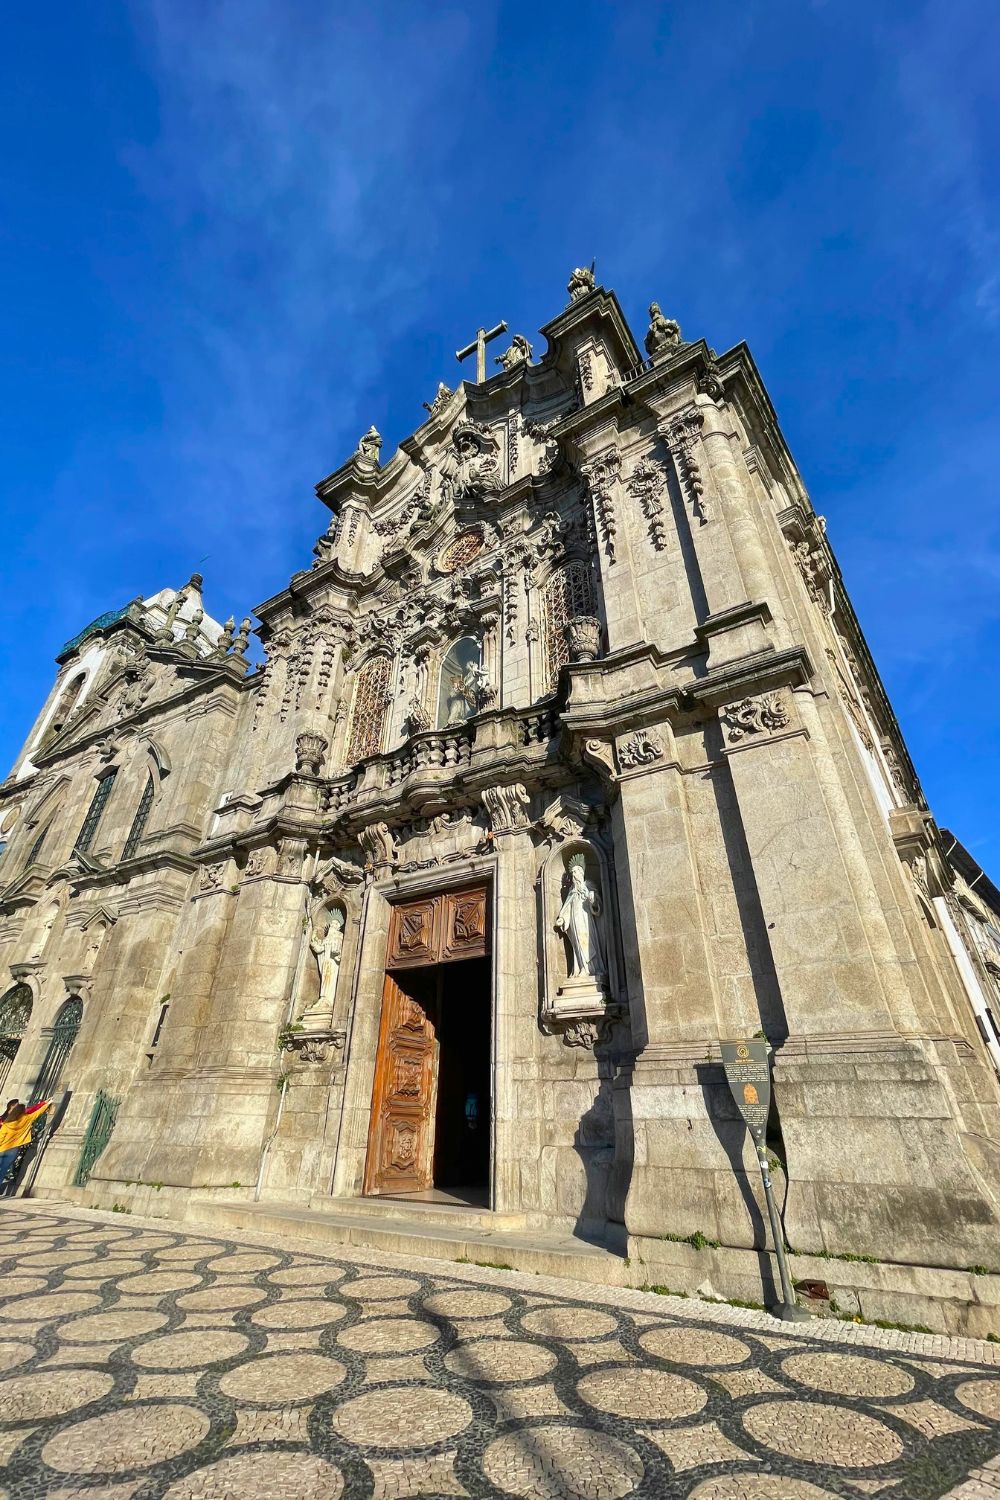 Exterior view of a grand baroque church in Porto under a clear blue sky, detailing its elaborate architecture and sculptural elements.